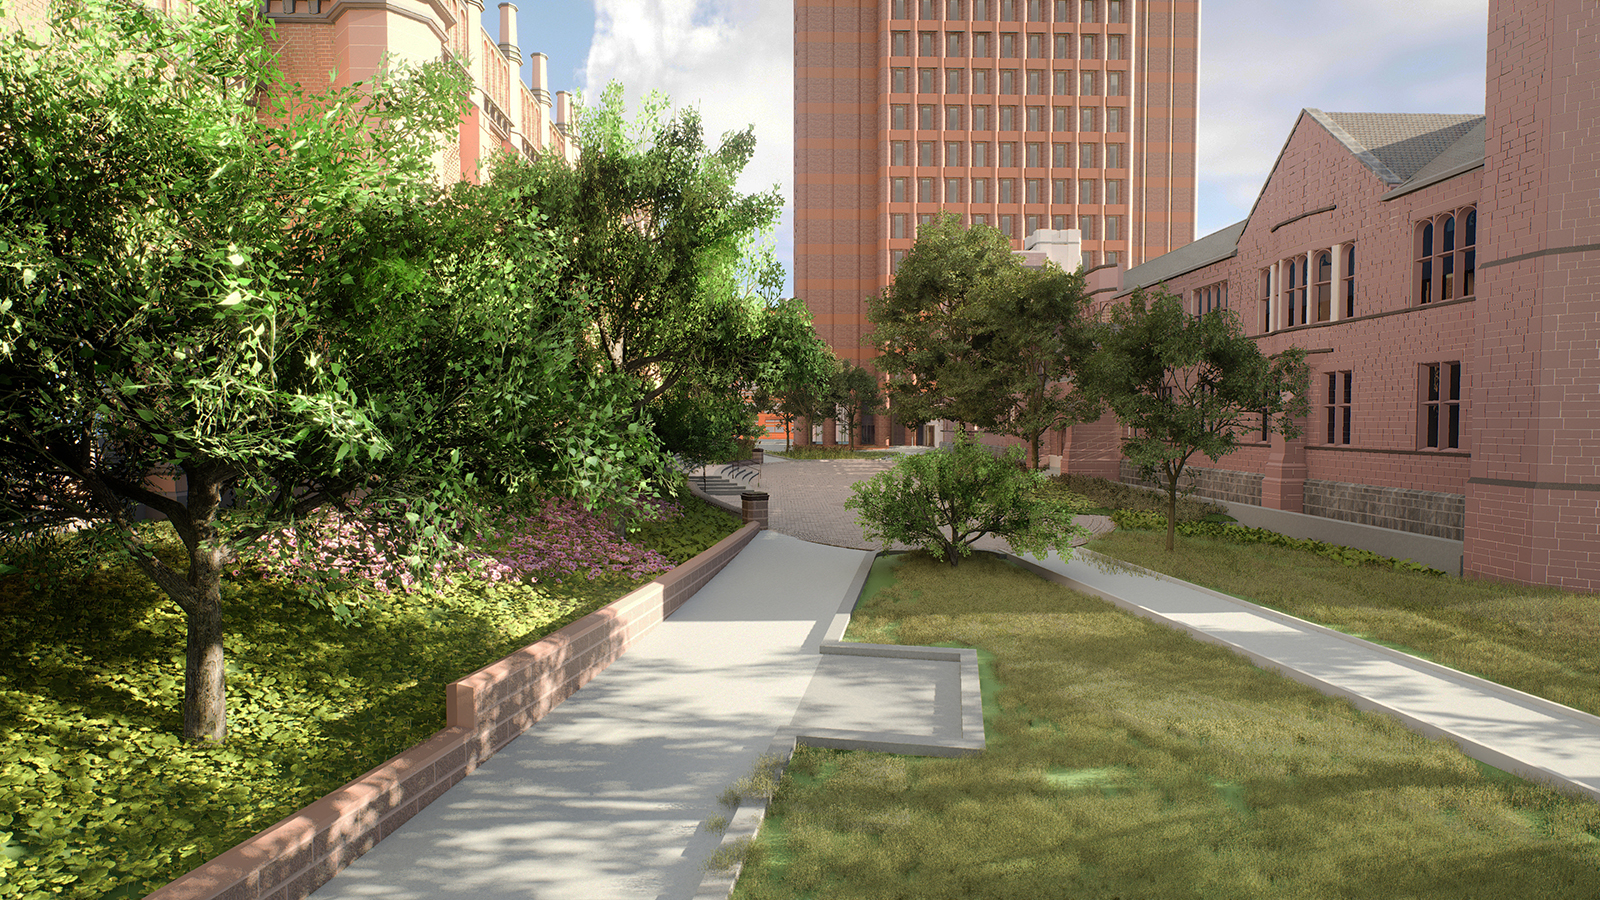 Rendering of the renewed landscape and connectivity from Prospect Street